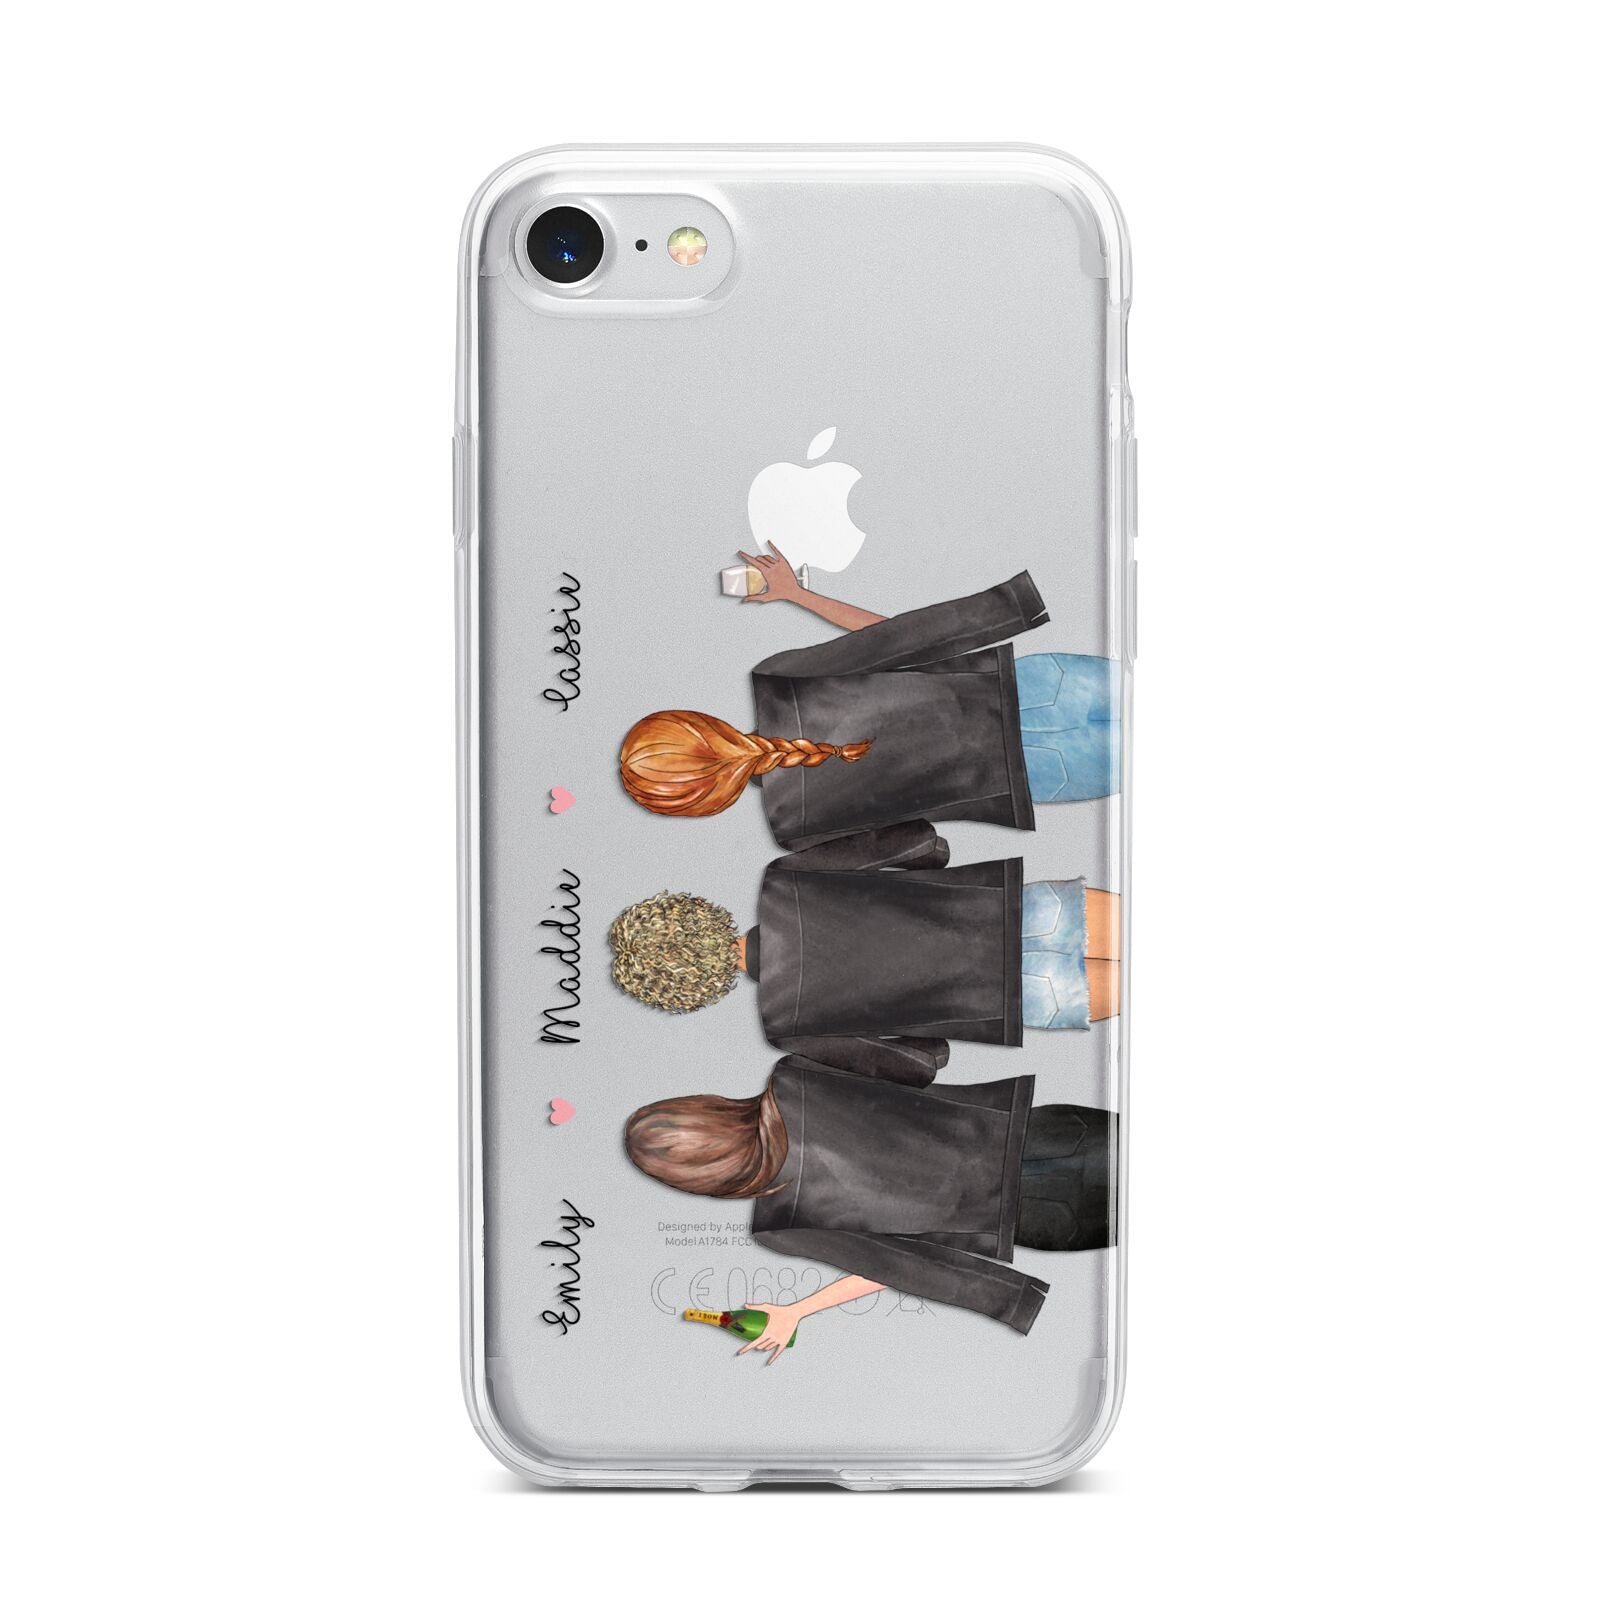 3 Best Friends with Names iPhone 7 Bumper Case on Silver iPhone